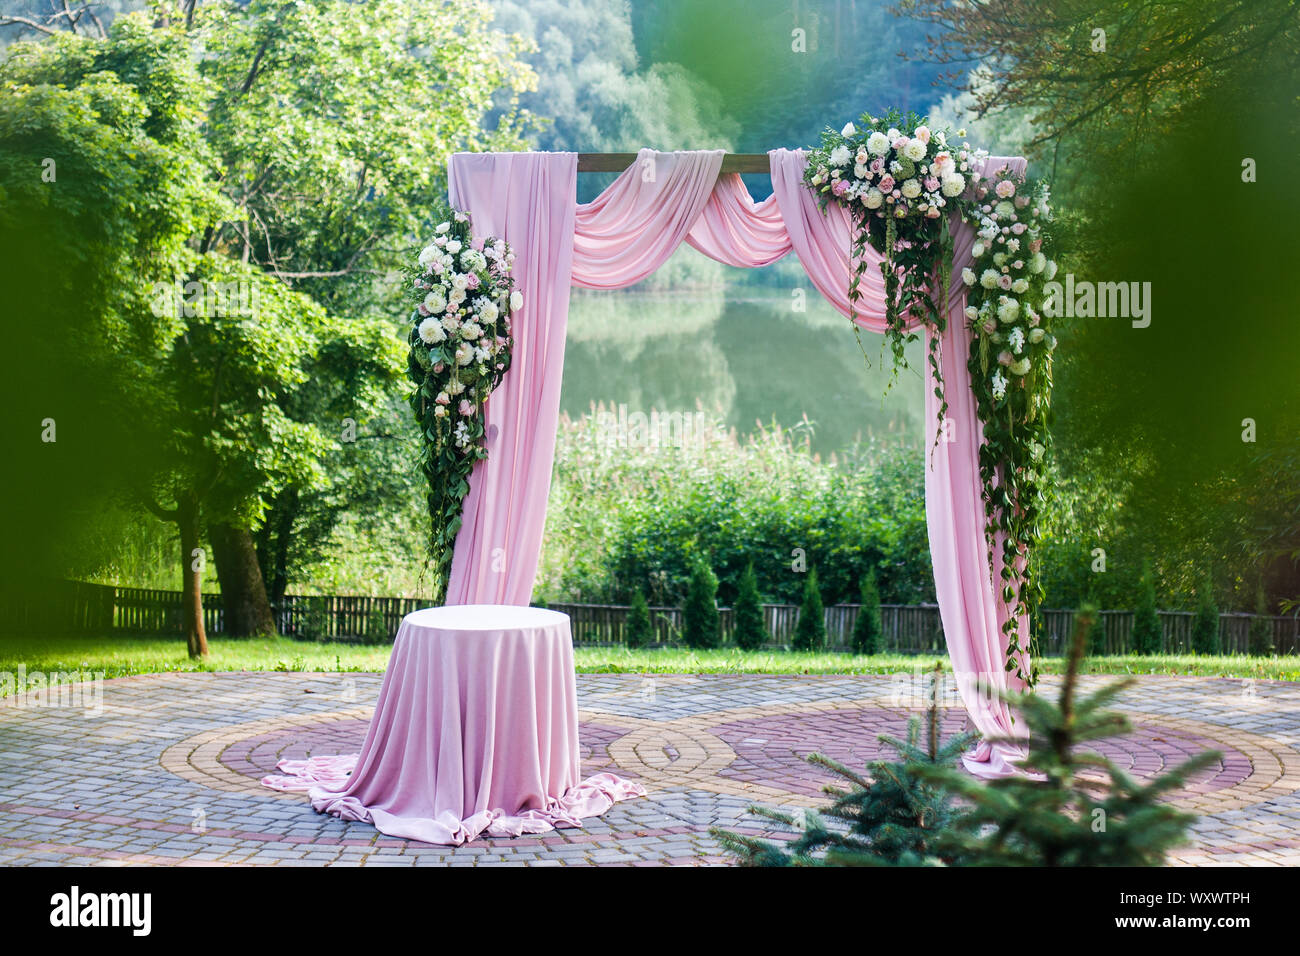 Pink wedding arch with floral white and pink decorations outside in green summer garden Stock Photo